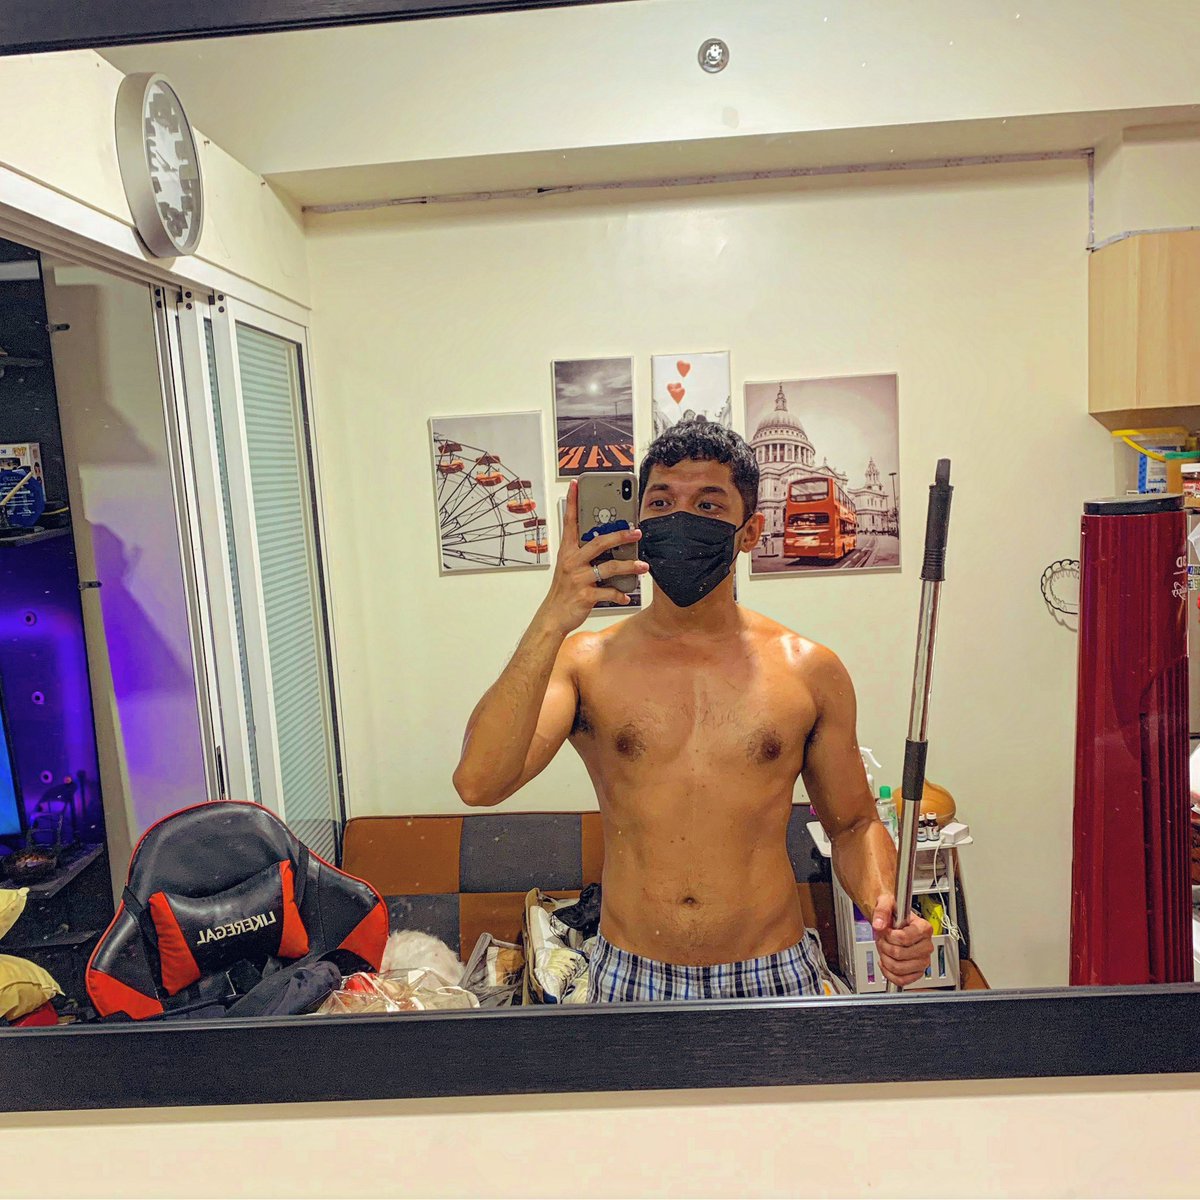 General cleaning starts now,.. 🧹
#HouseBoy #TGIS #ProductiveDay